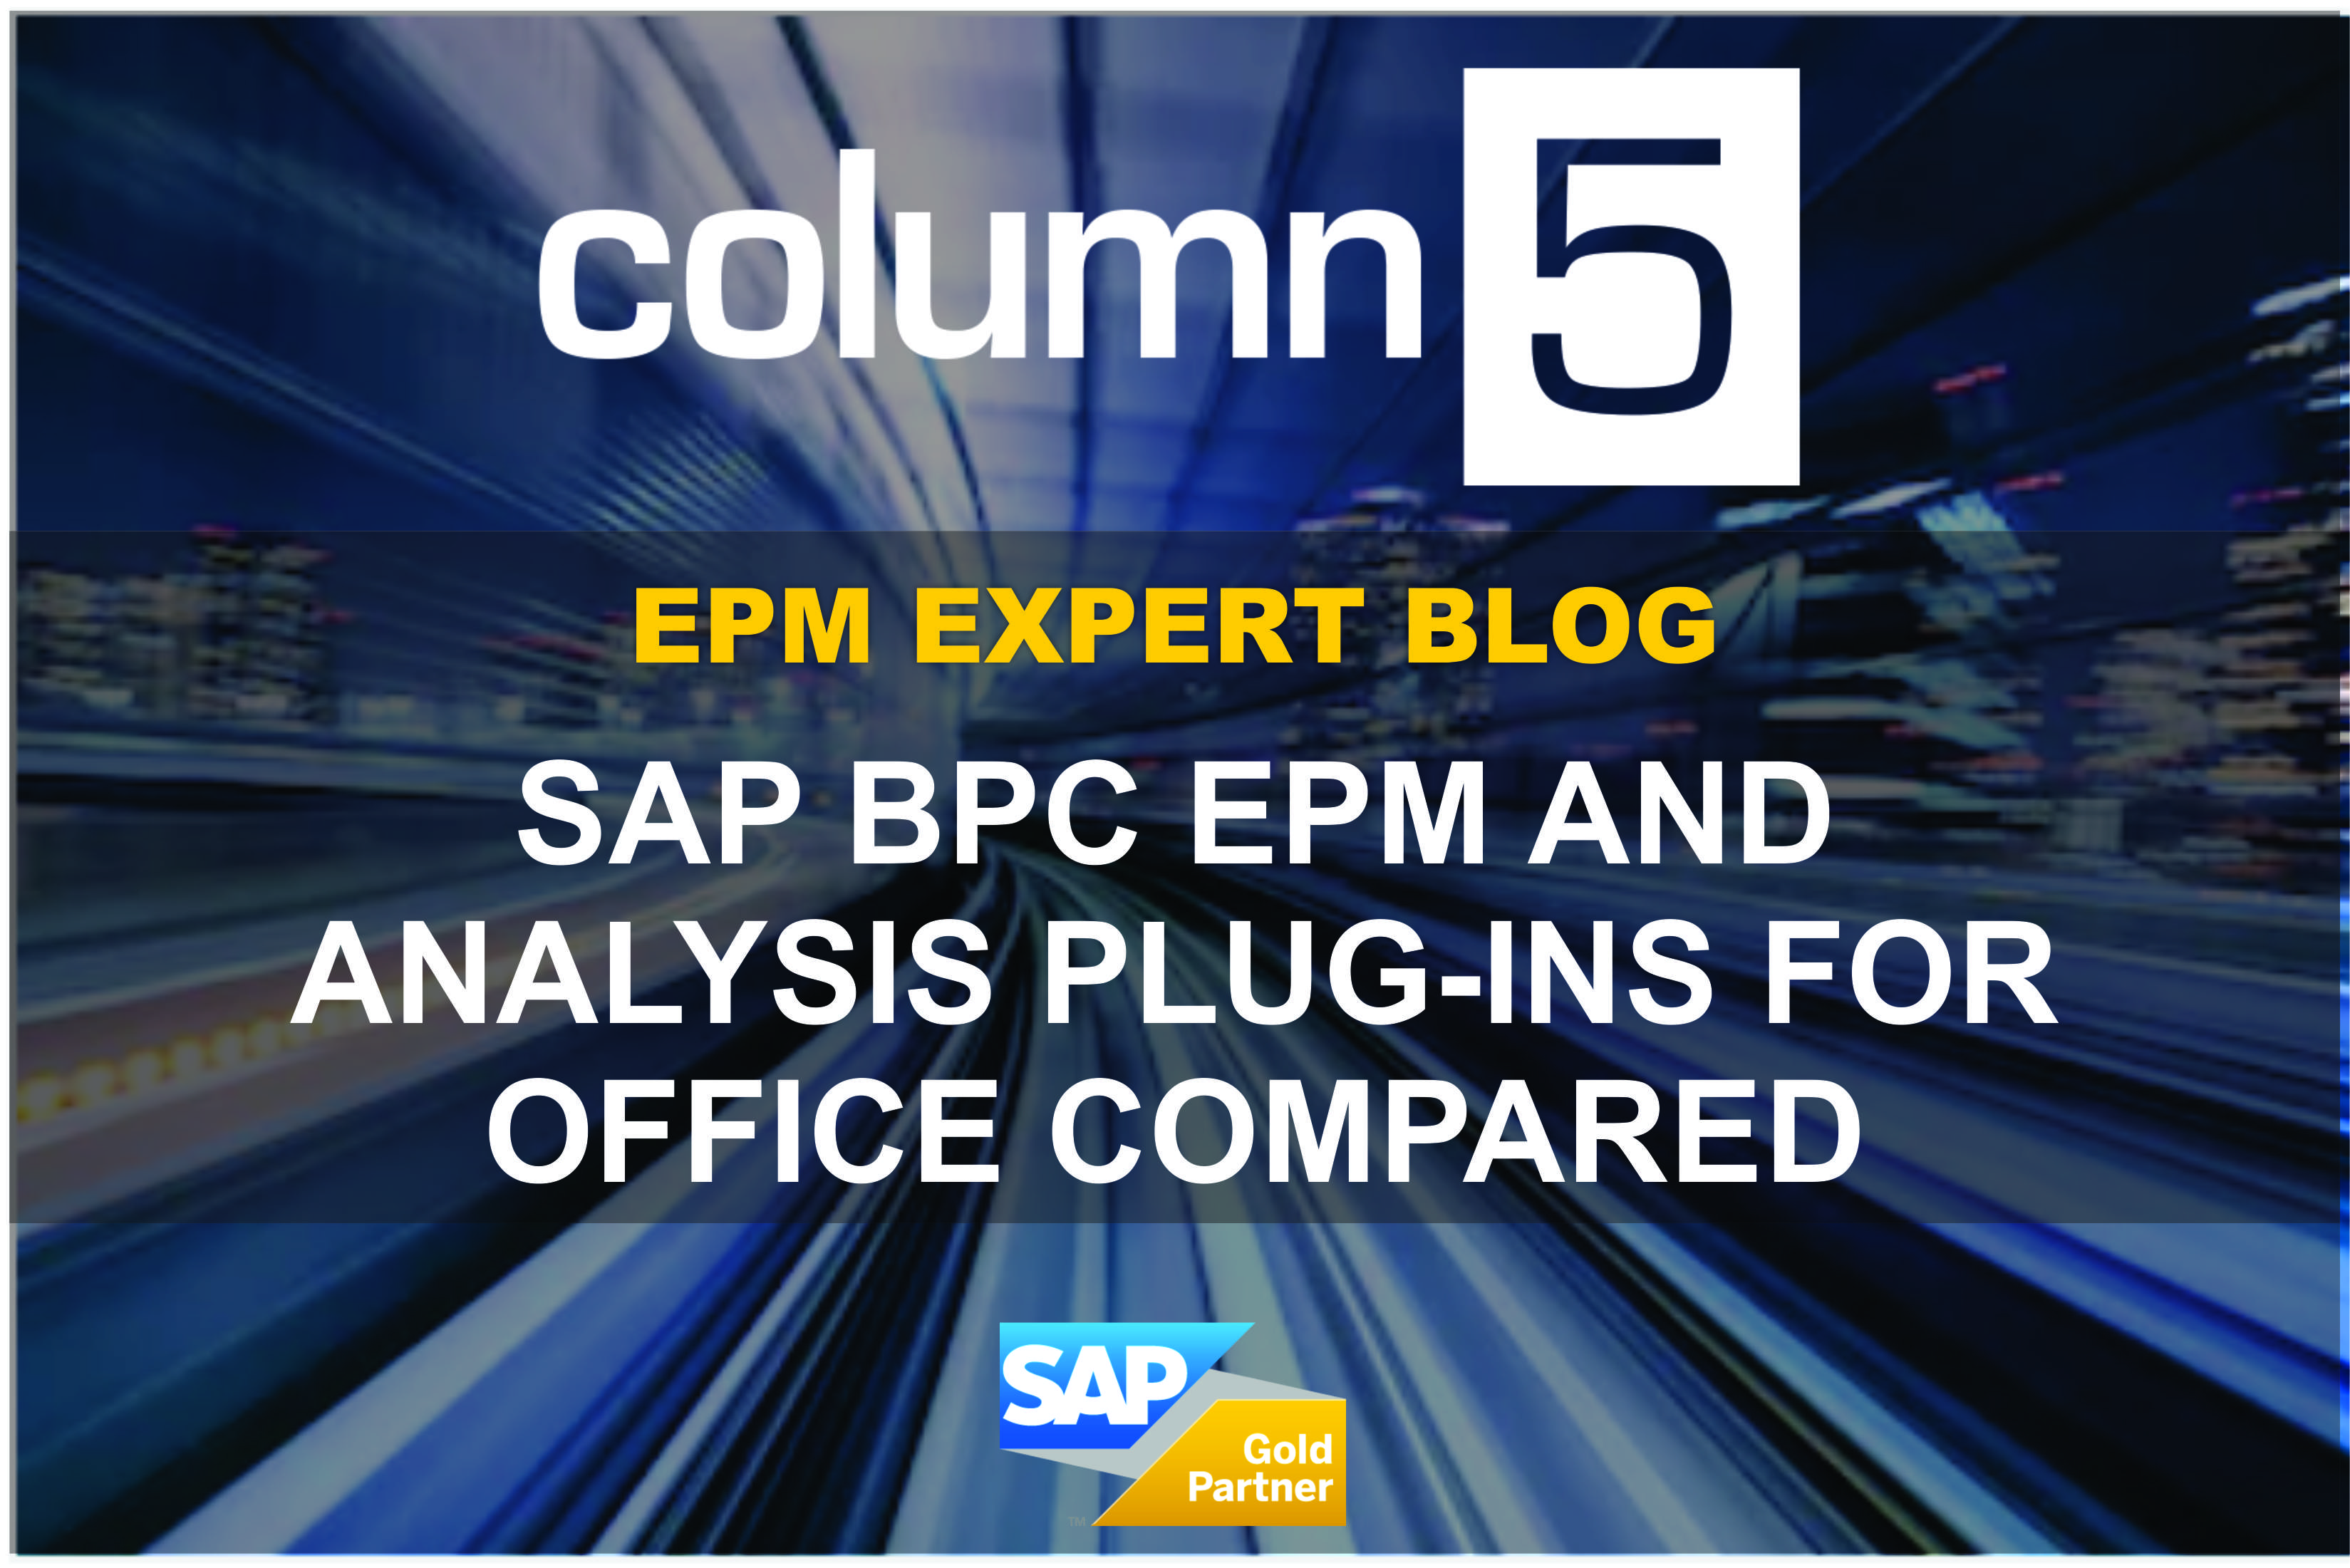 SAP BPC EPM and Analysis plug-ins for Office Compared